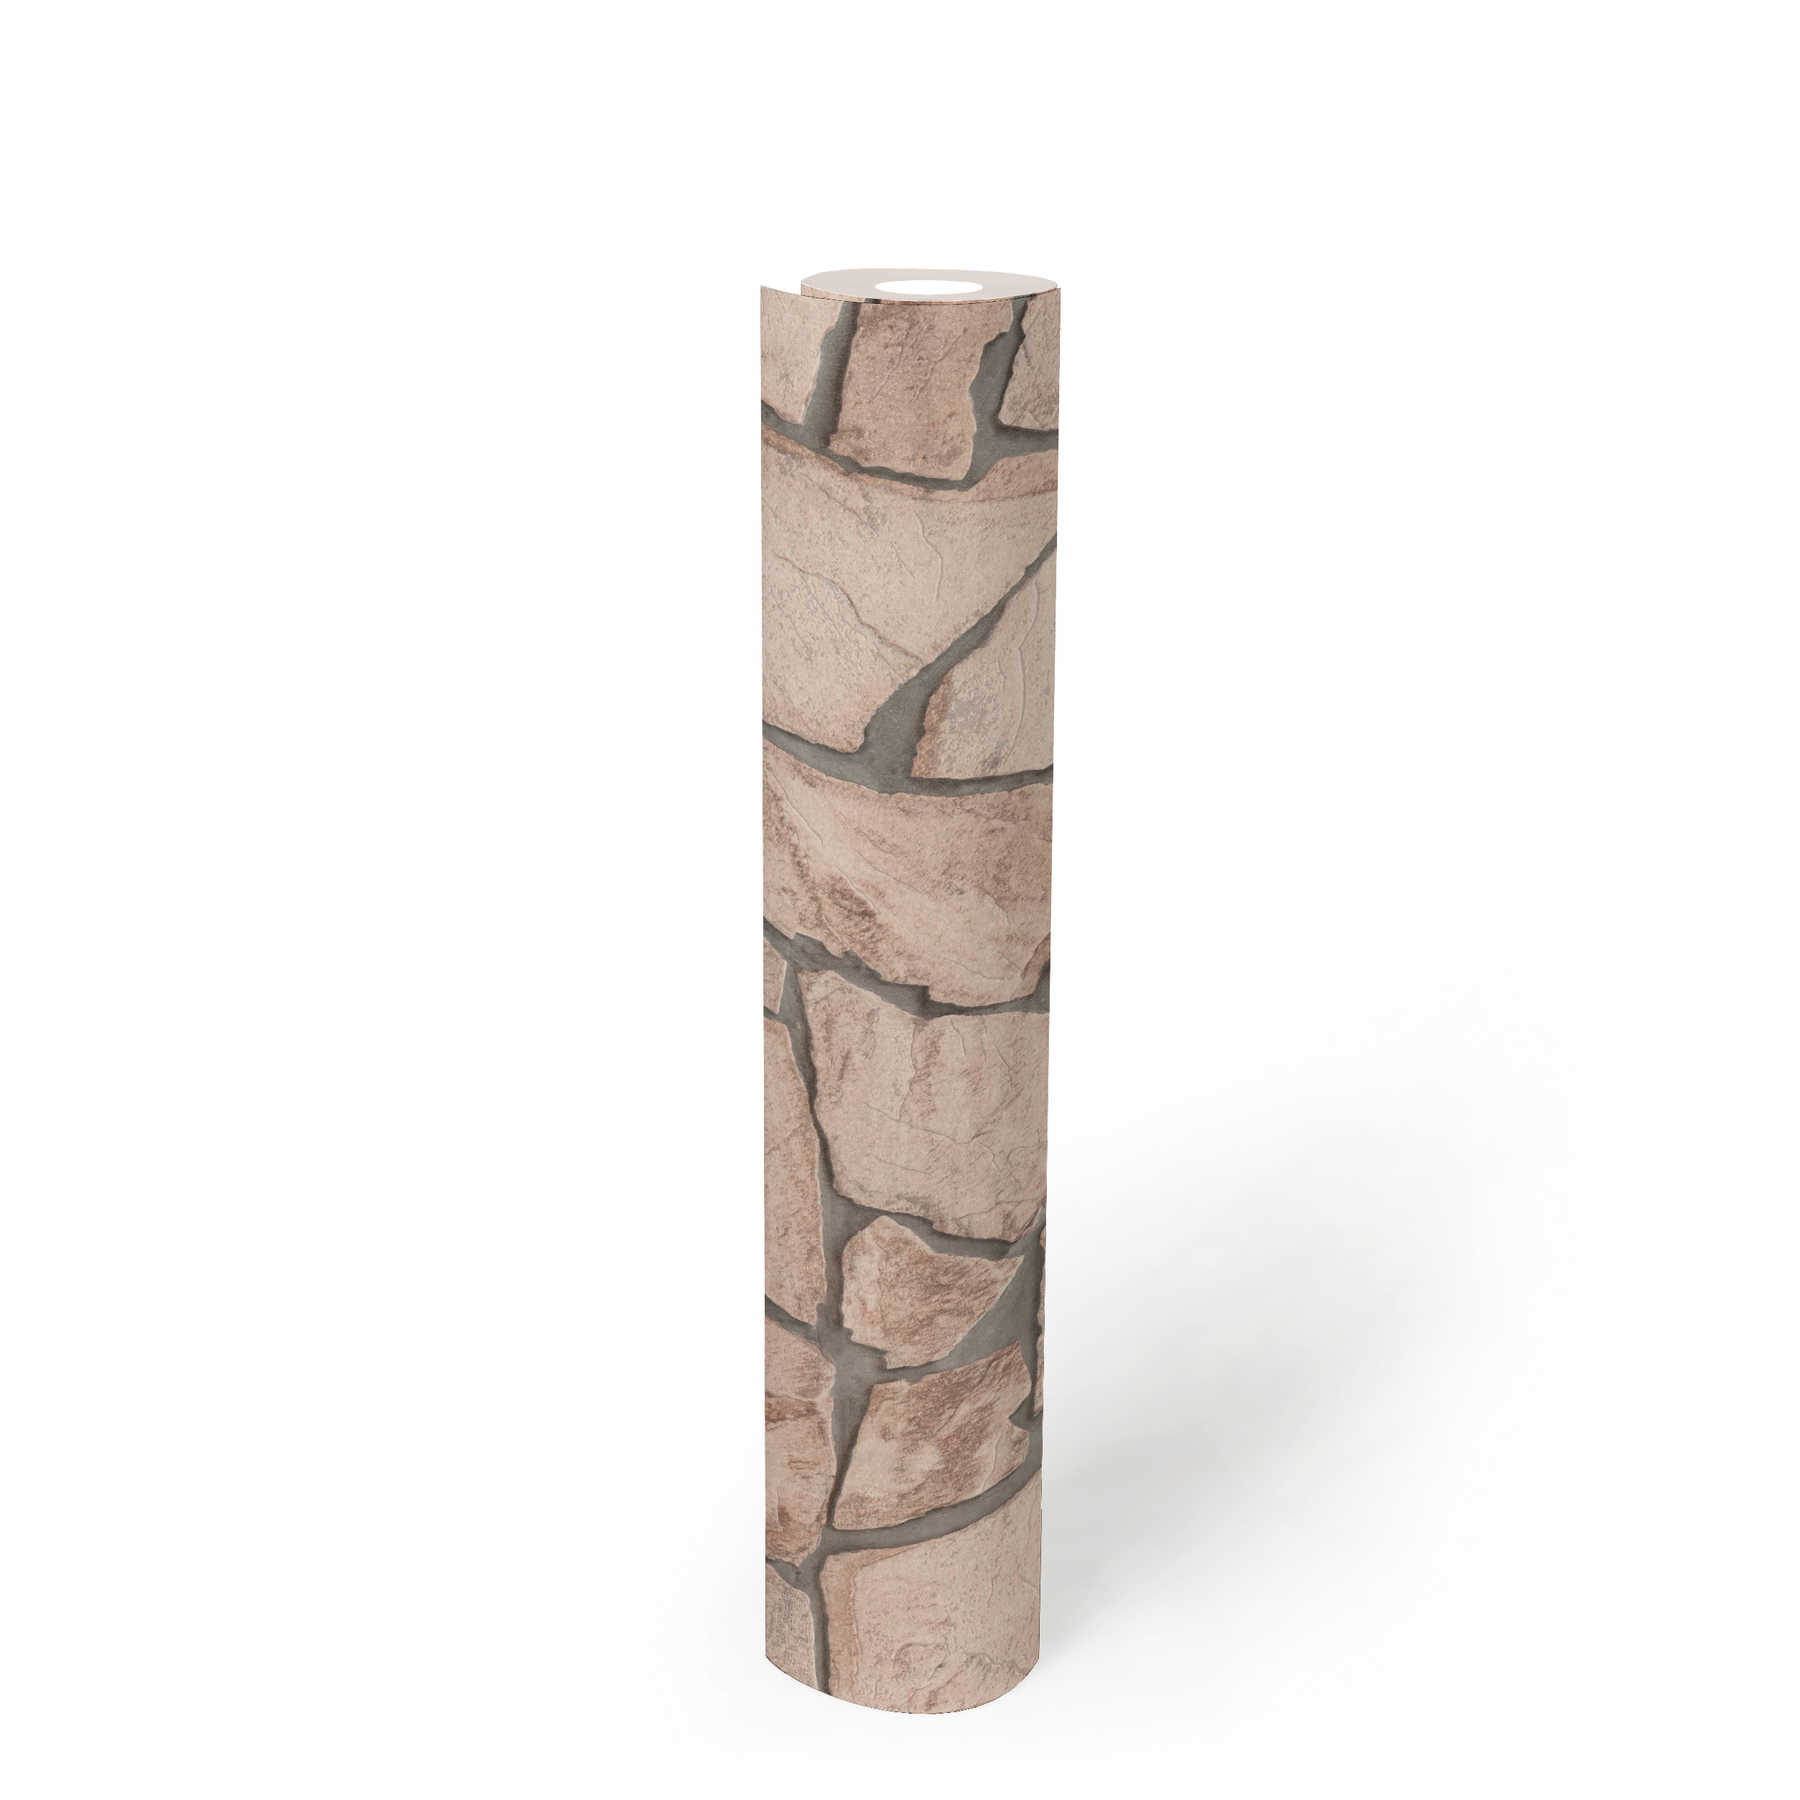             Stone wallpaper 3D effect, realistic natural stone pattern - beige, grey, brown
        